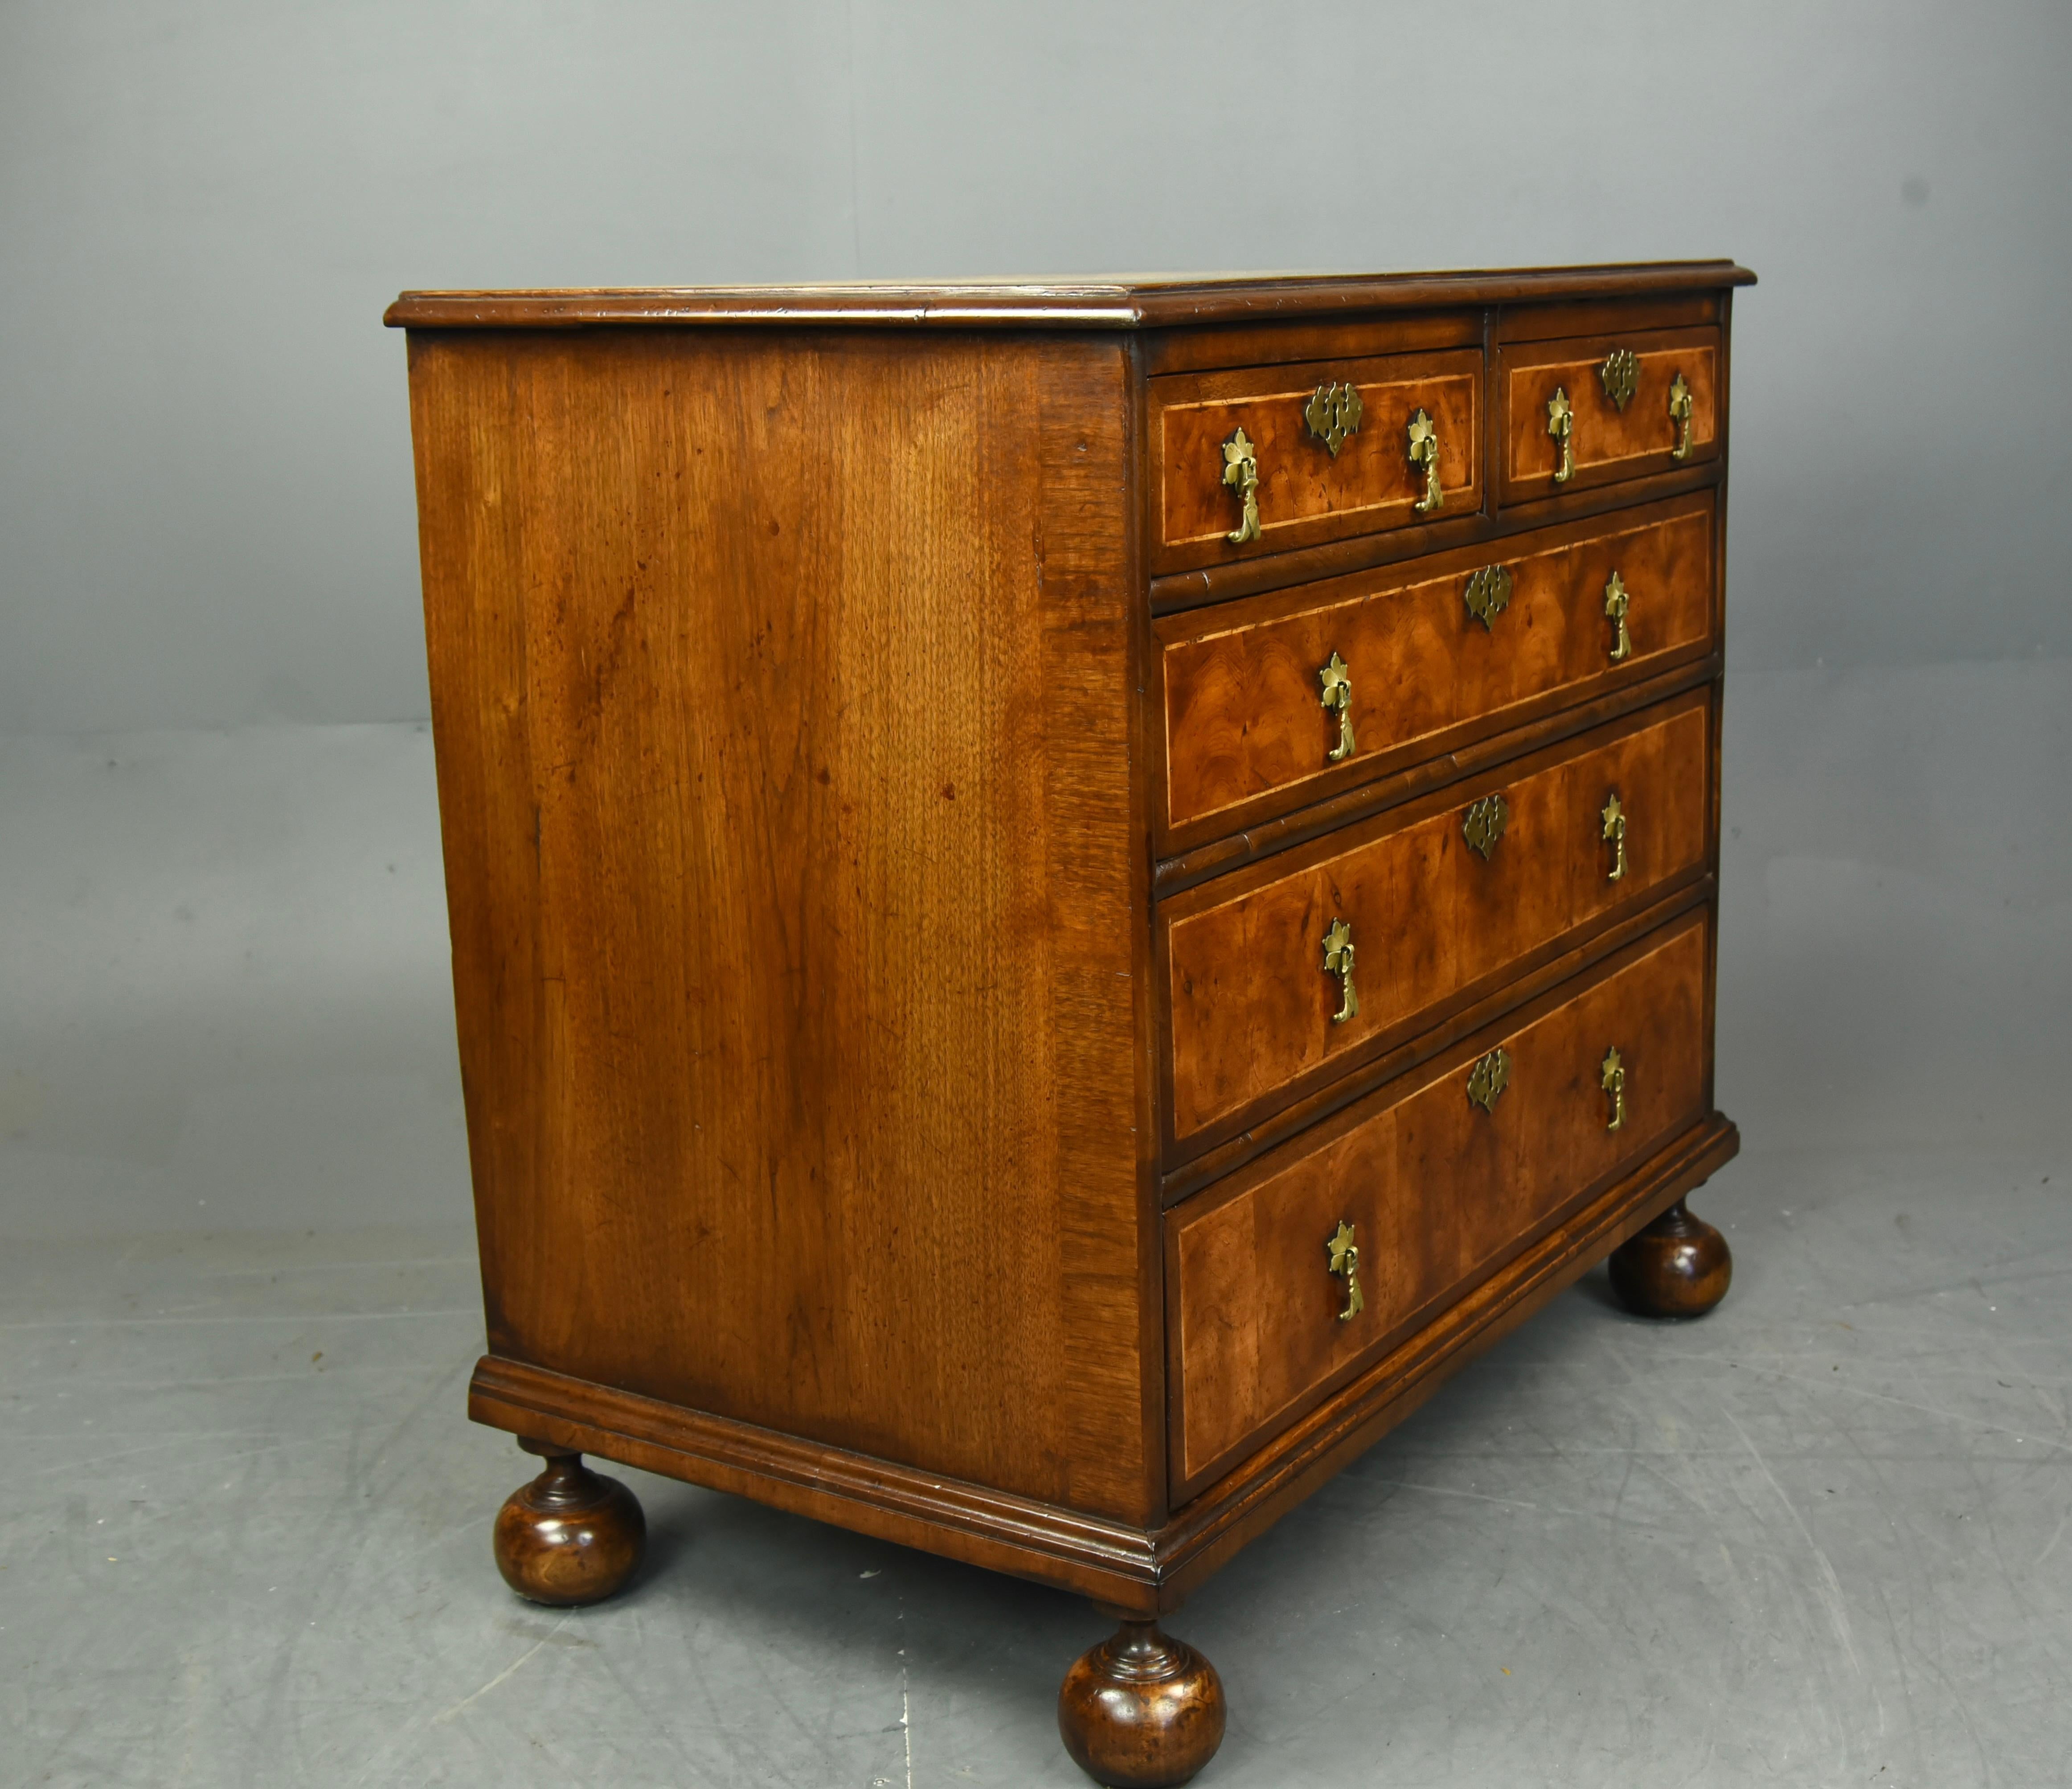 Queen Anne Fine Late 18th Century English Oyster Chest of Drawers Commode